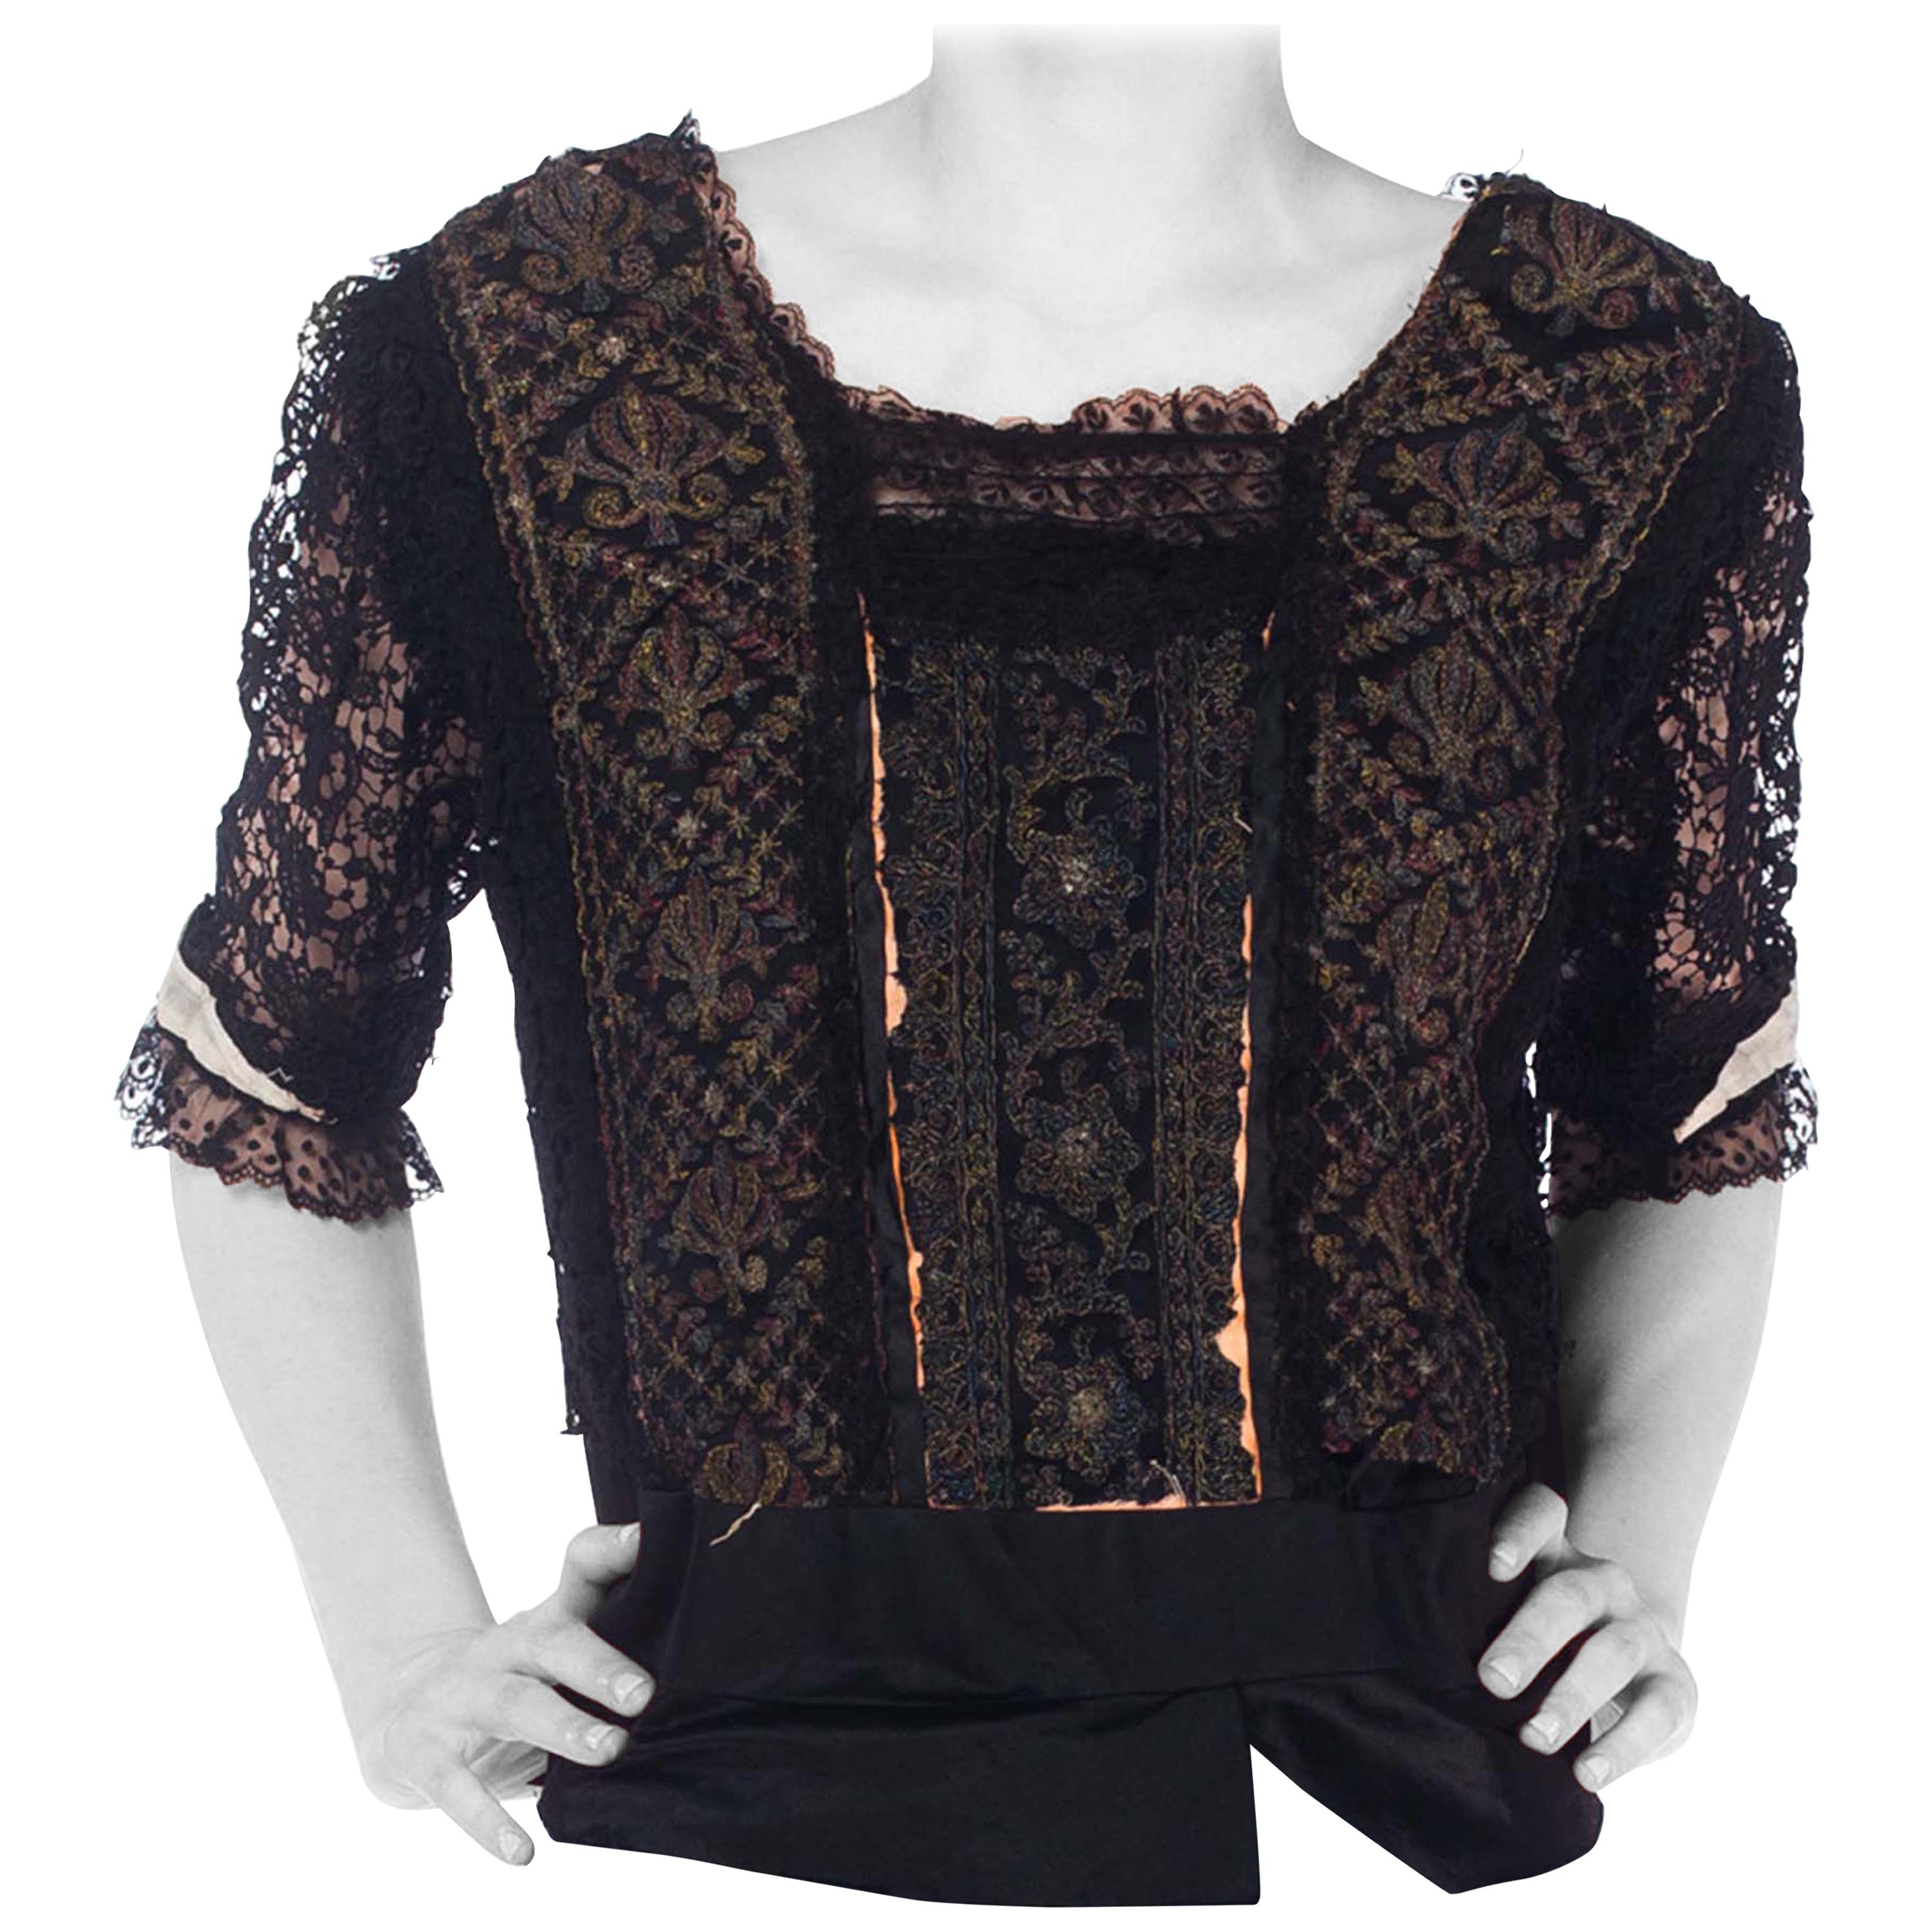 Edwardian Black Silk & Lace Top With Metallic Embroidery, As-Is For Sale